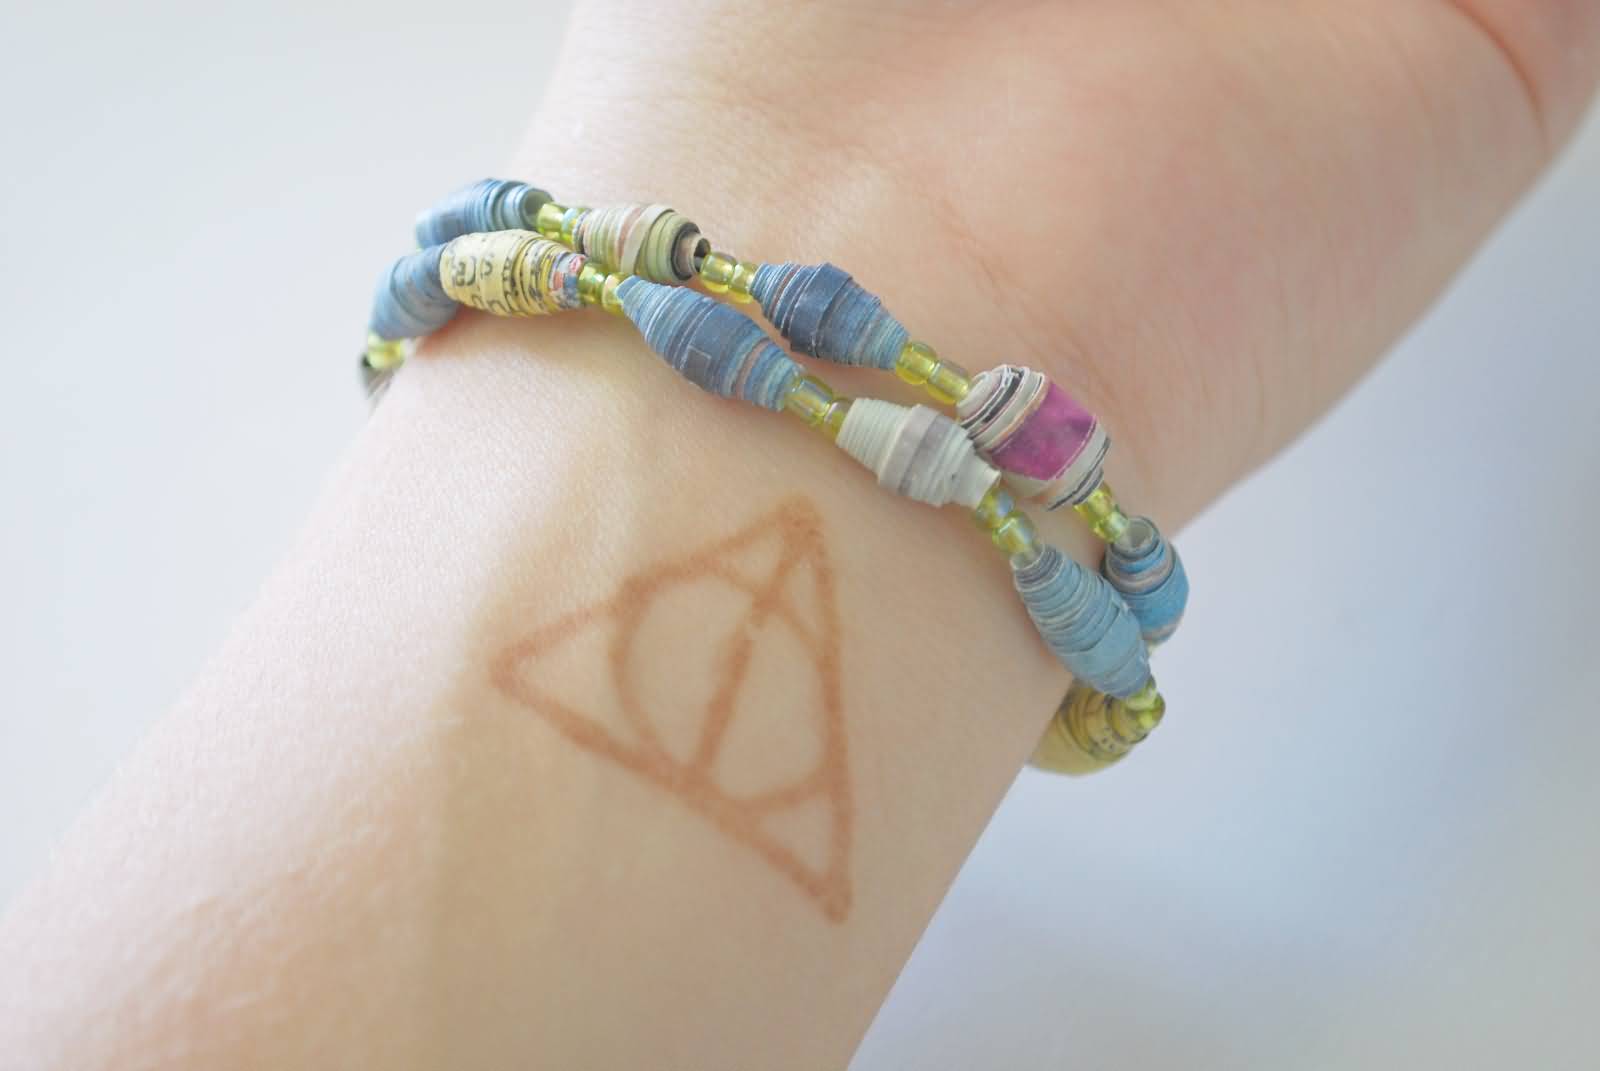 4. "Ink ideas for Deathly Hallows fans" - wide 3